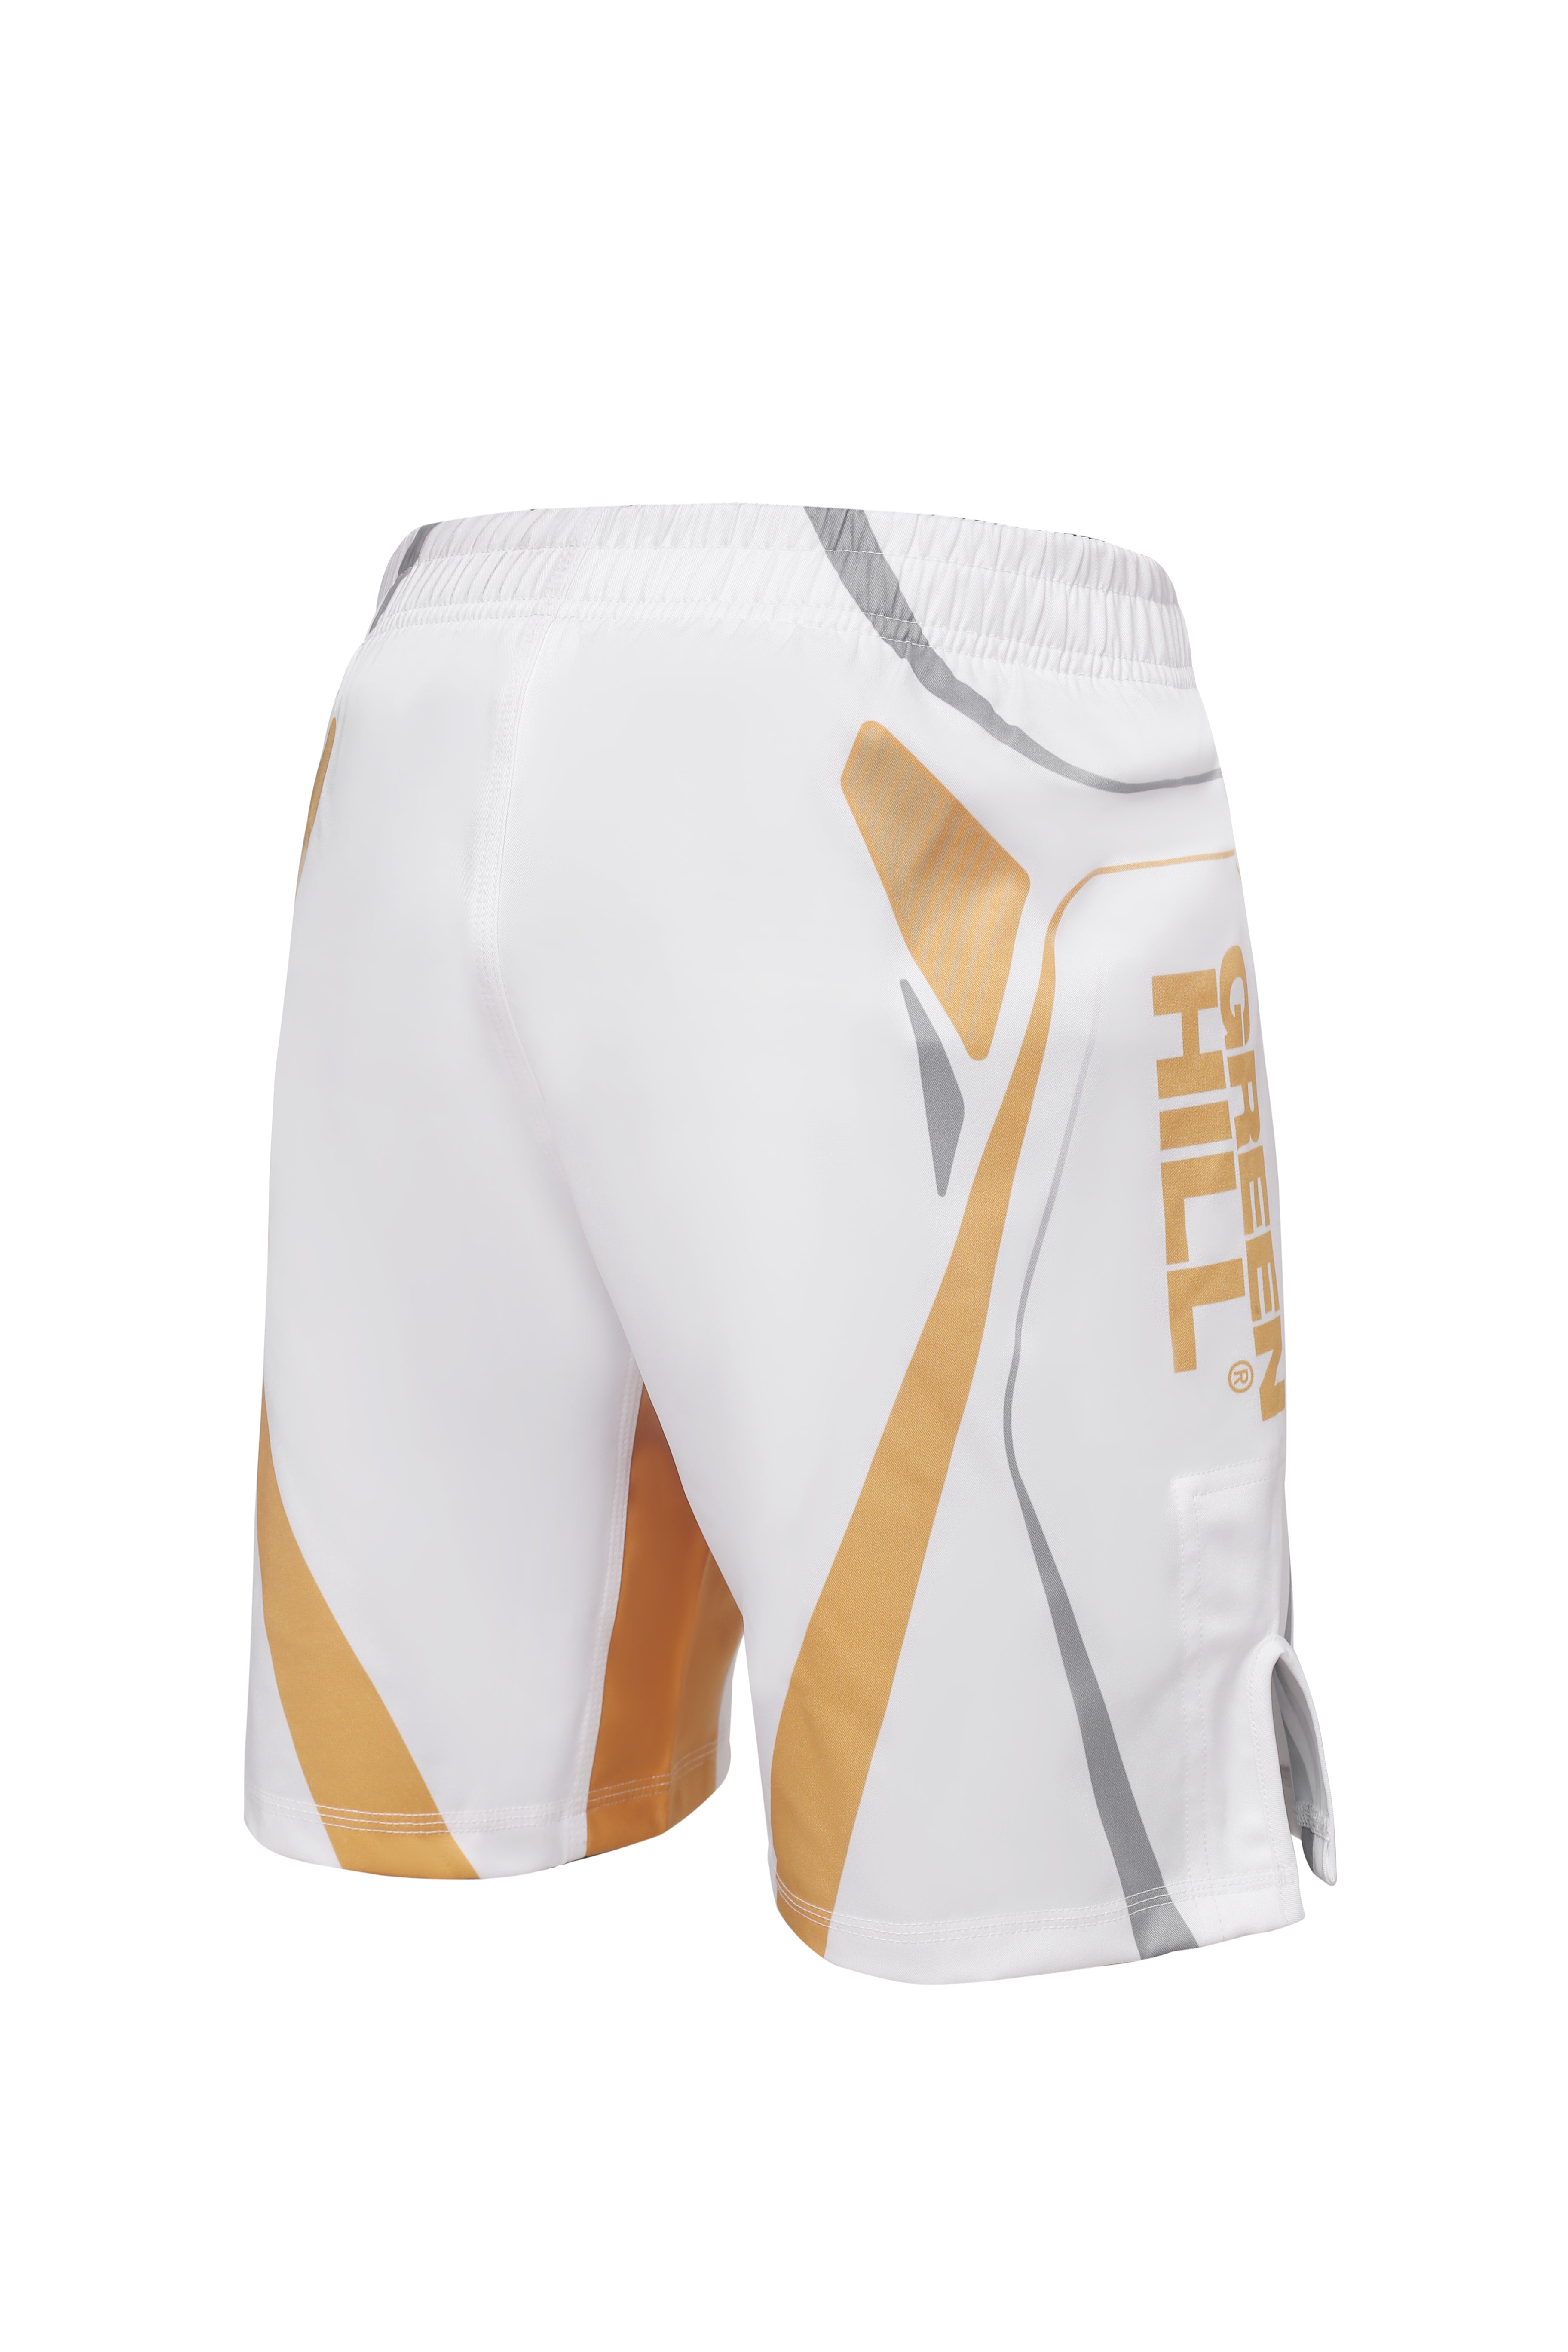 GREEN HILL New MMA Shorts IMMAF APPROVED White 2023